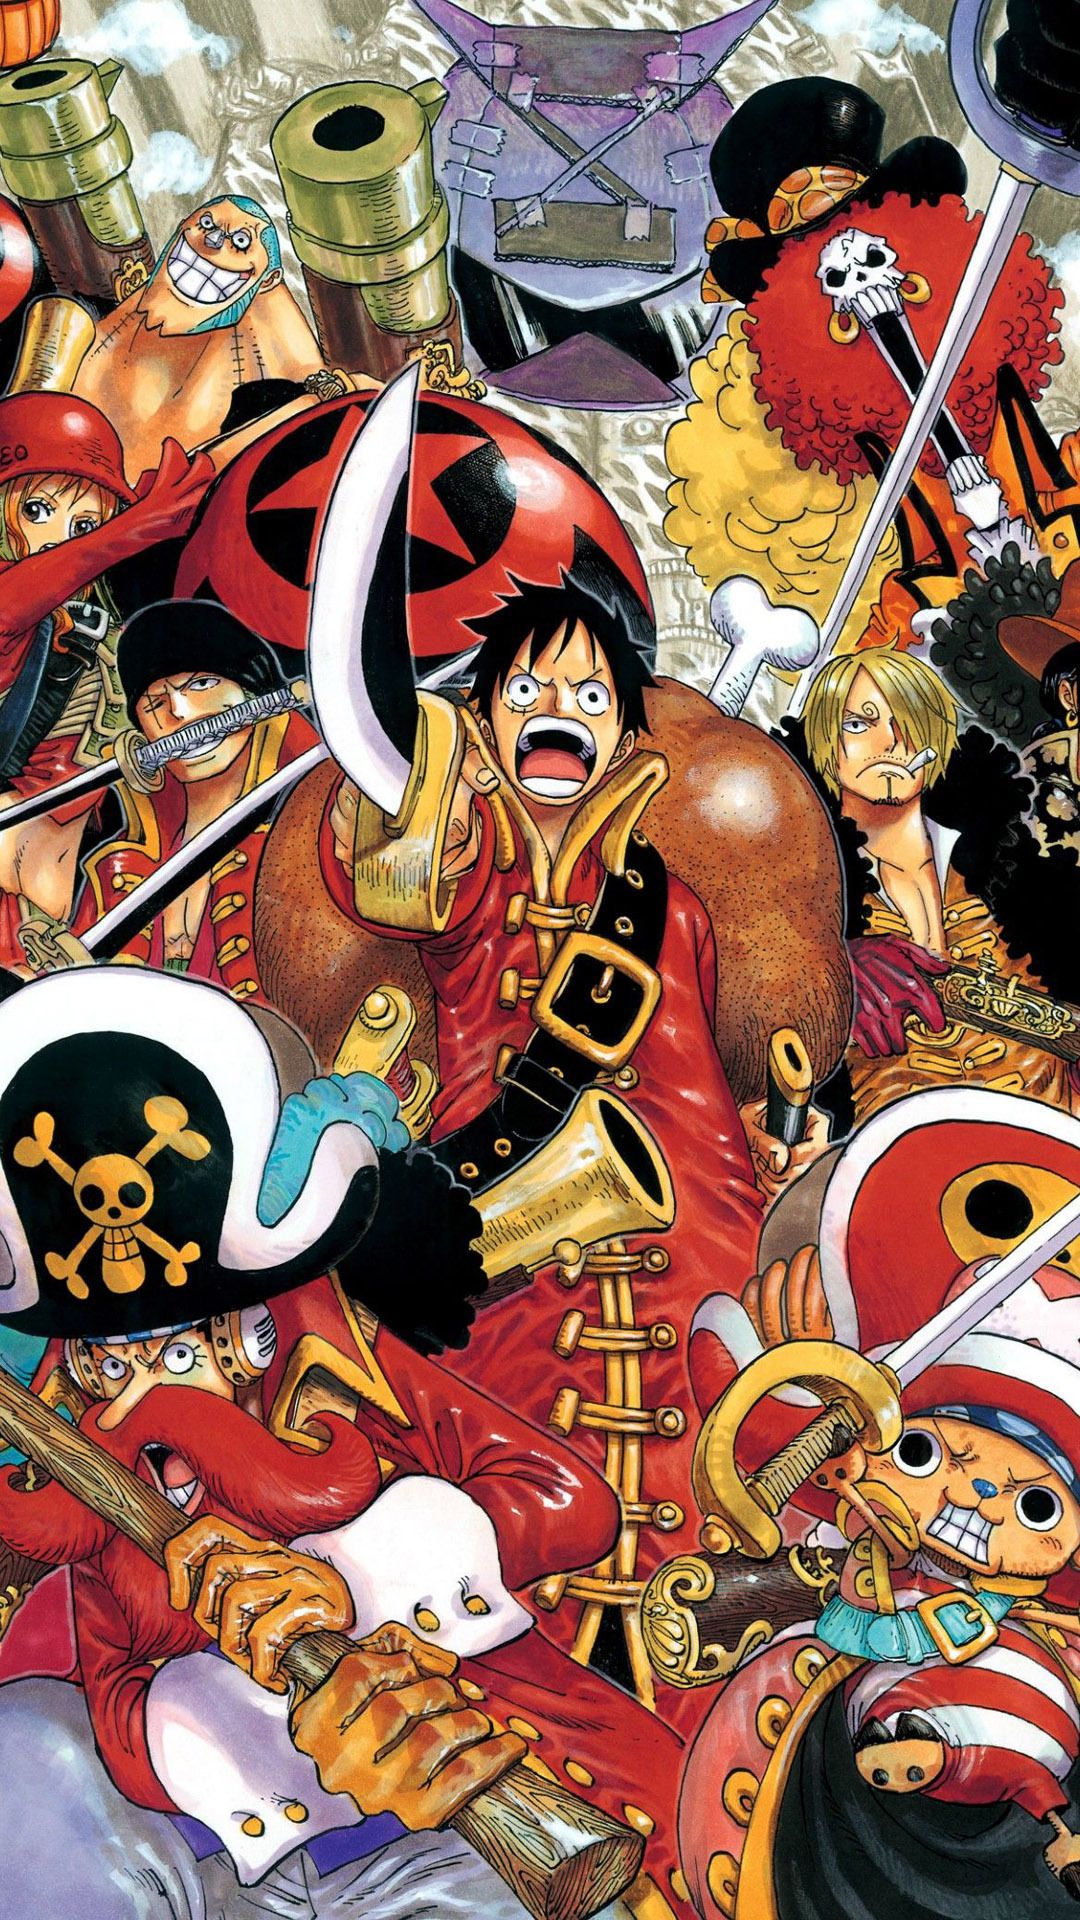 Download One Piece Iphone Background Free - One Piece Background Iphone - HD Wallpaper 